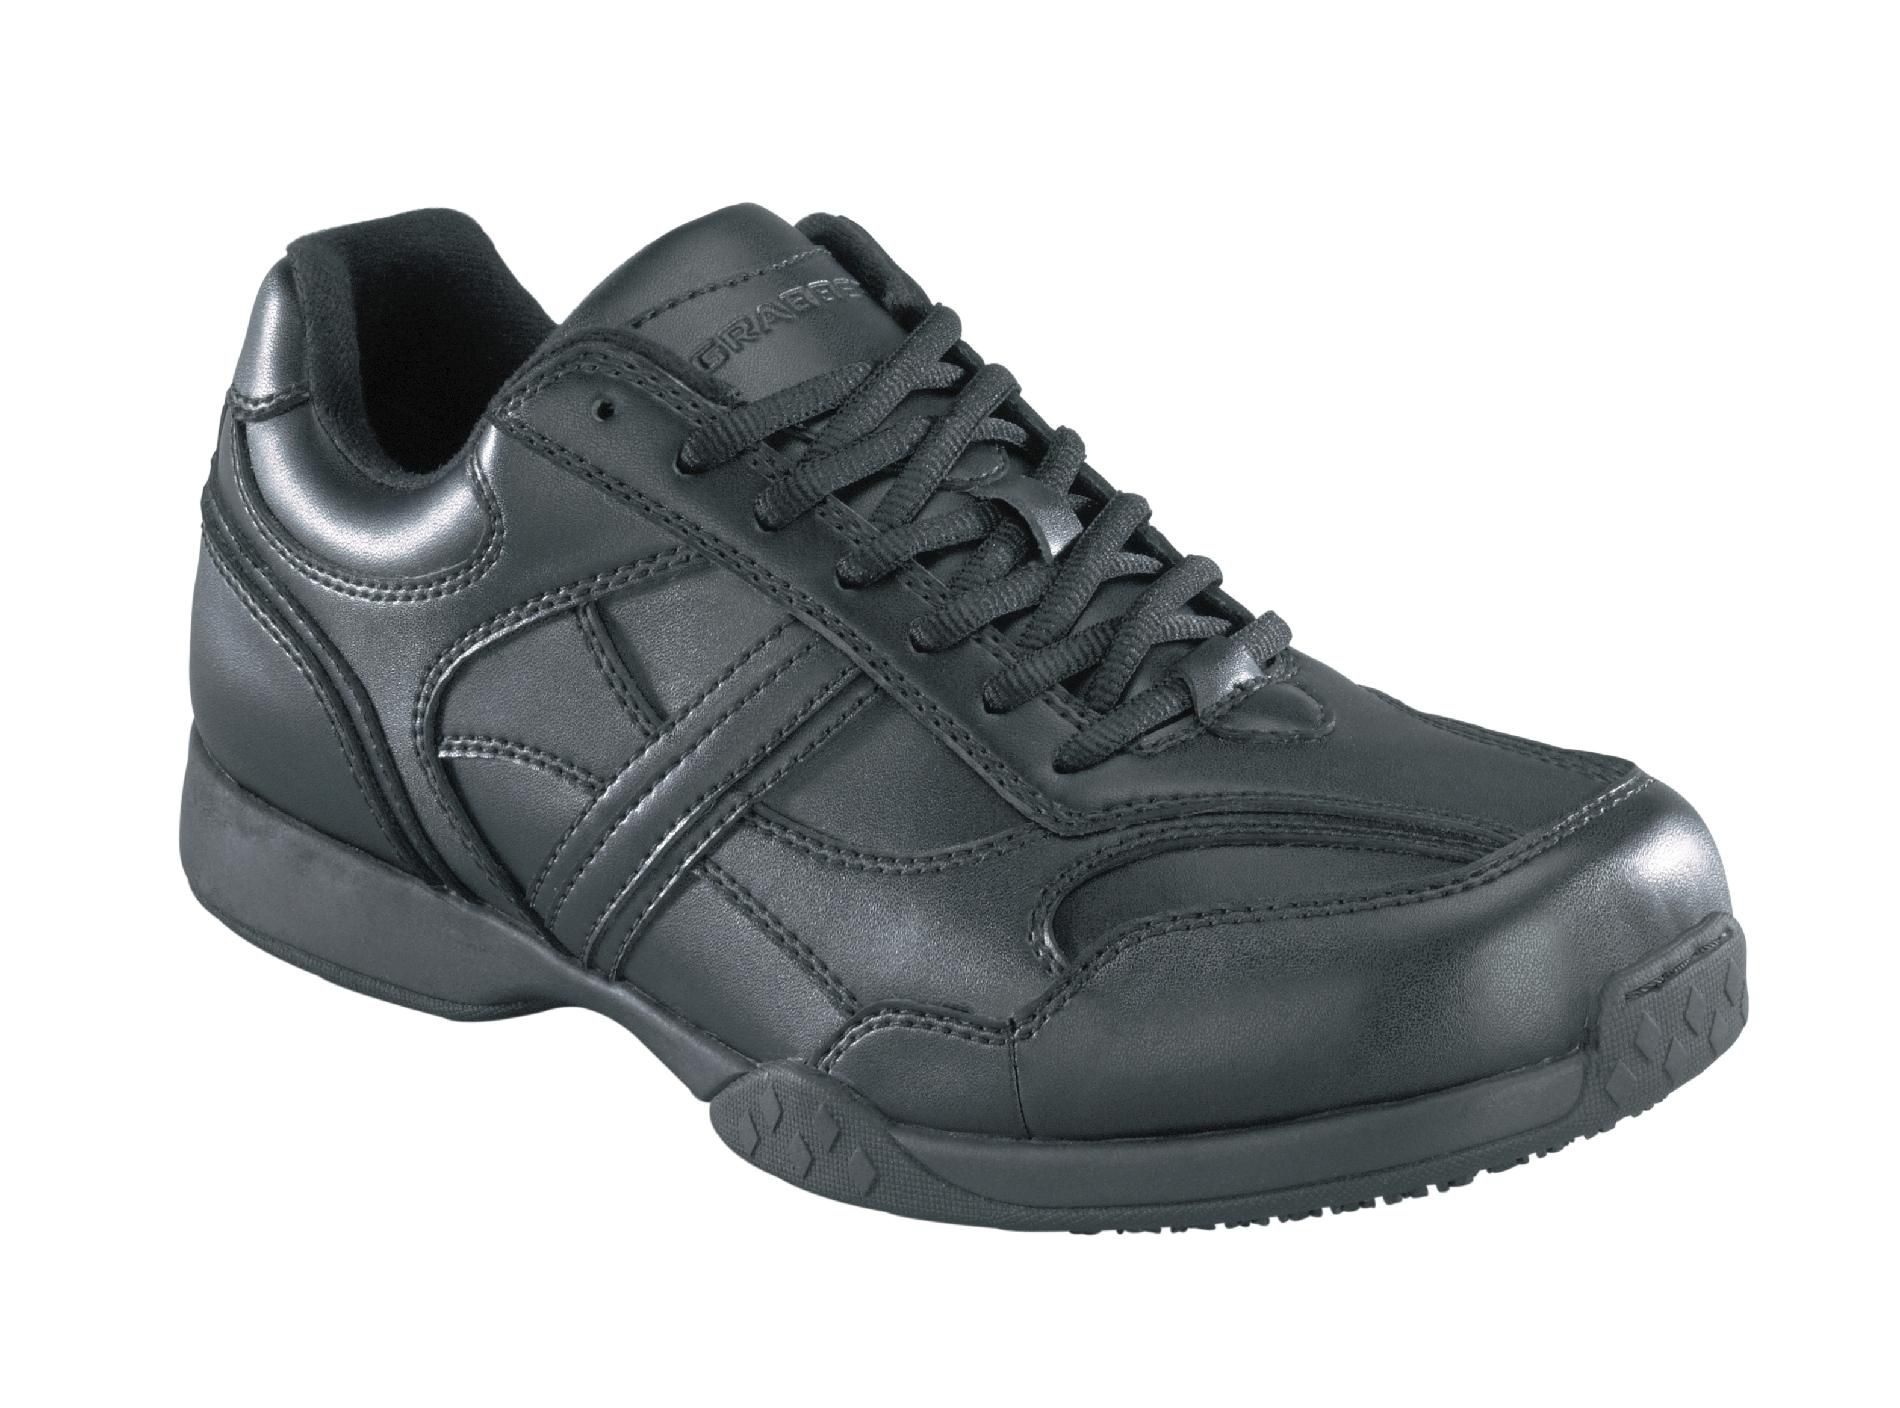 Grabbers Men's Calypso Euro Lace Oxford #G0016 Wide Width Available - Black